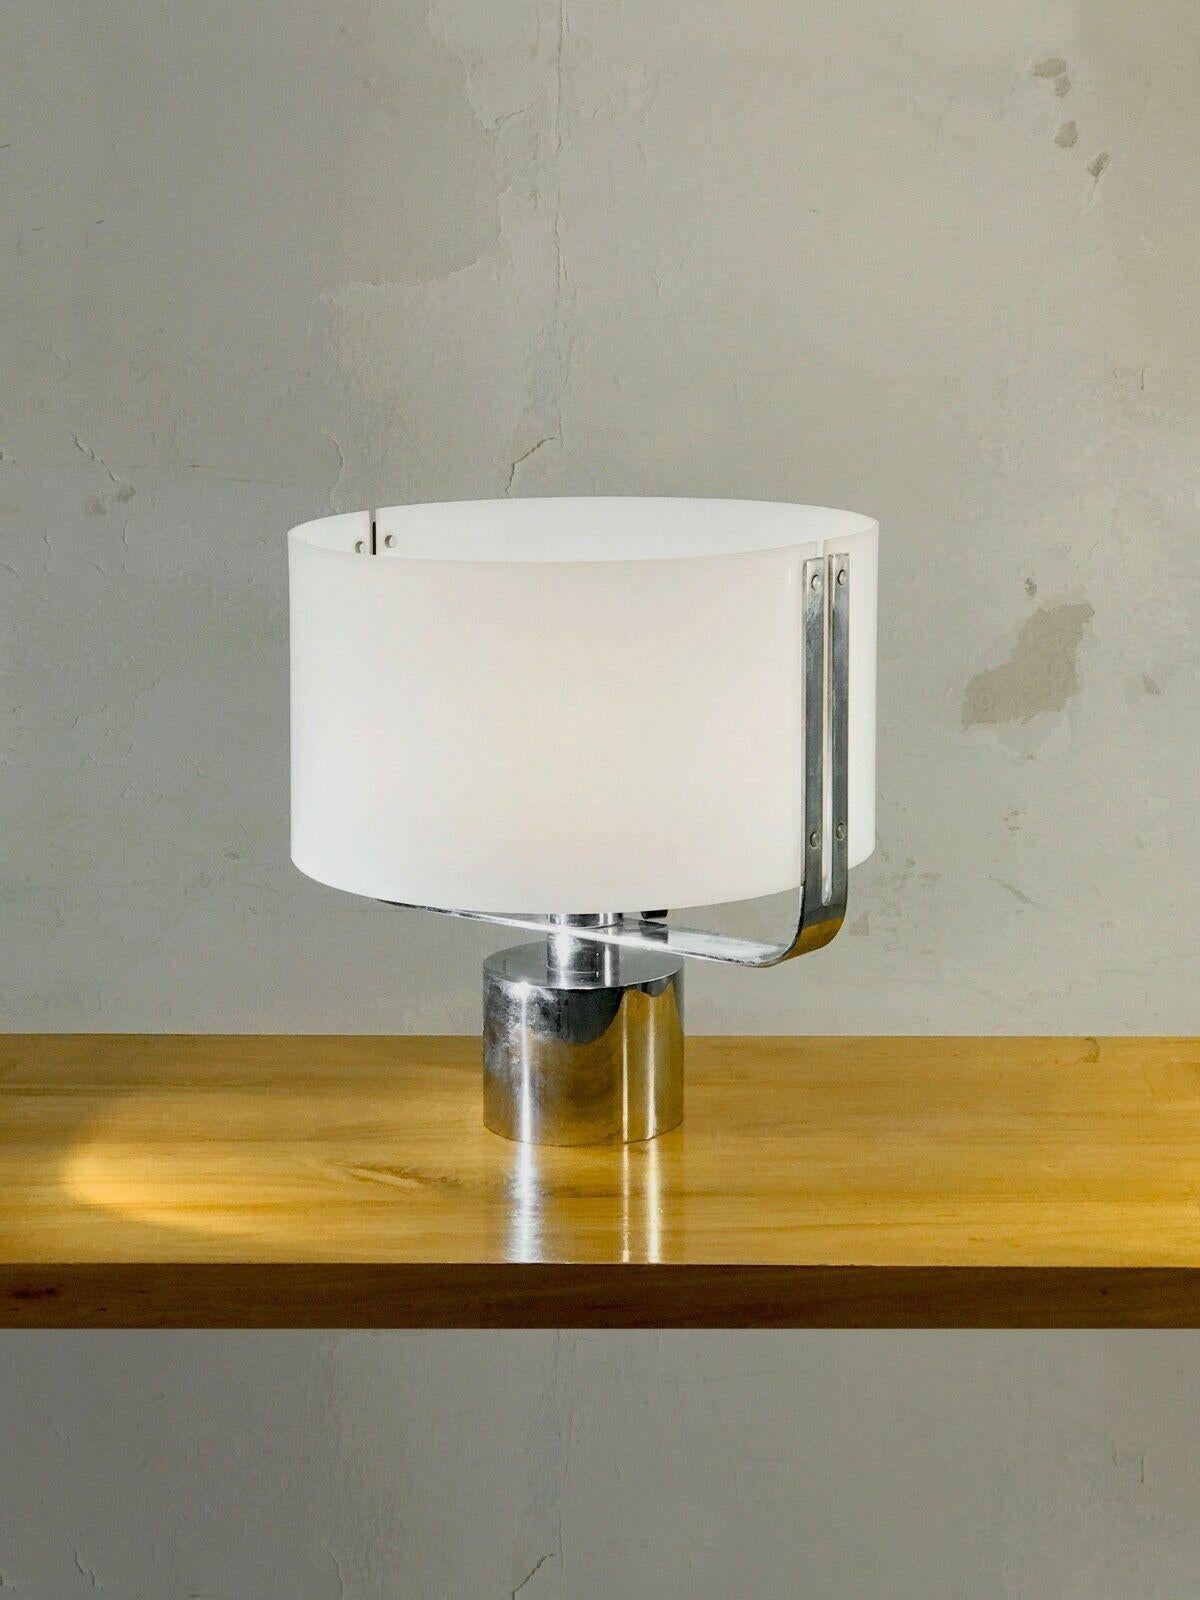 Space Age A RADICAL SPACE-AGE POST-MODERN Table Lamp by PAOLO CALIARI, LINEA T, Italy 1970 For Sale